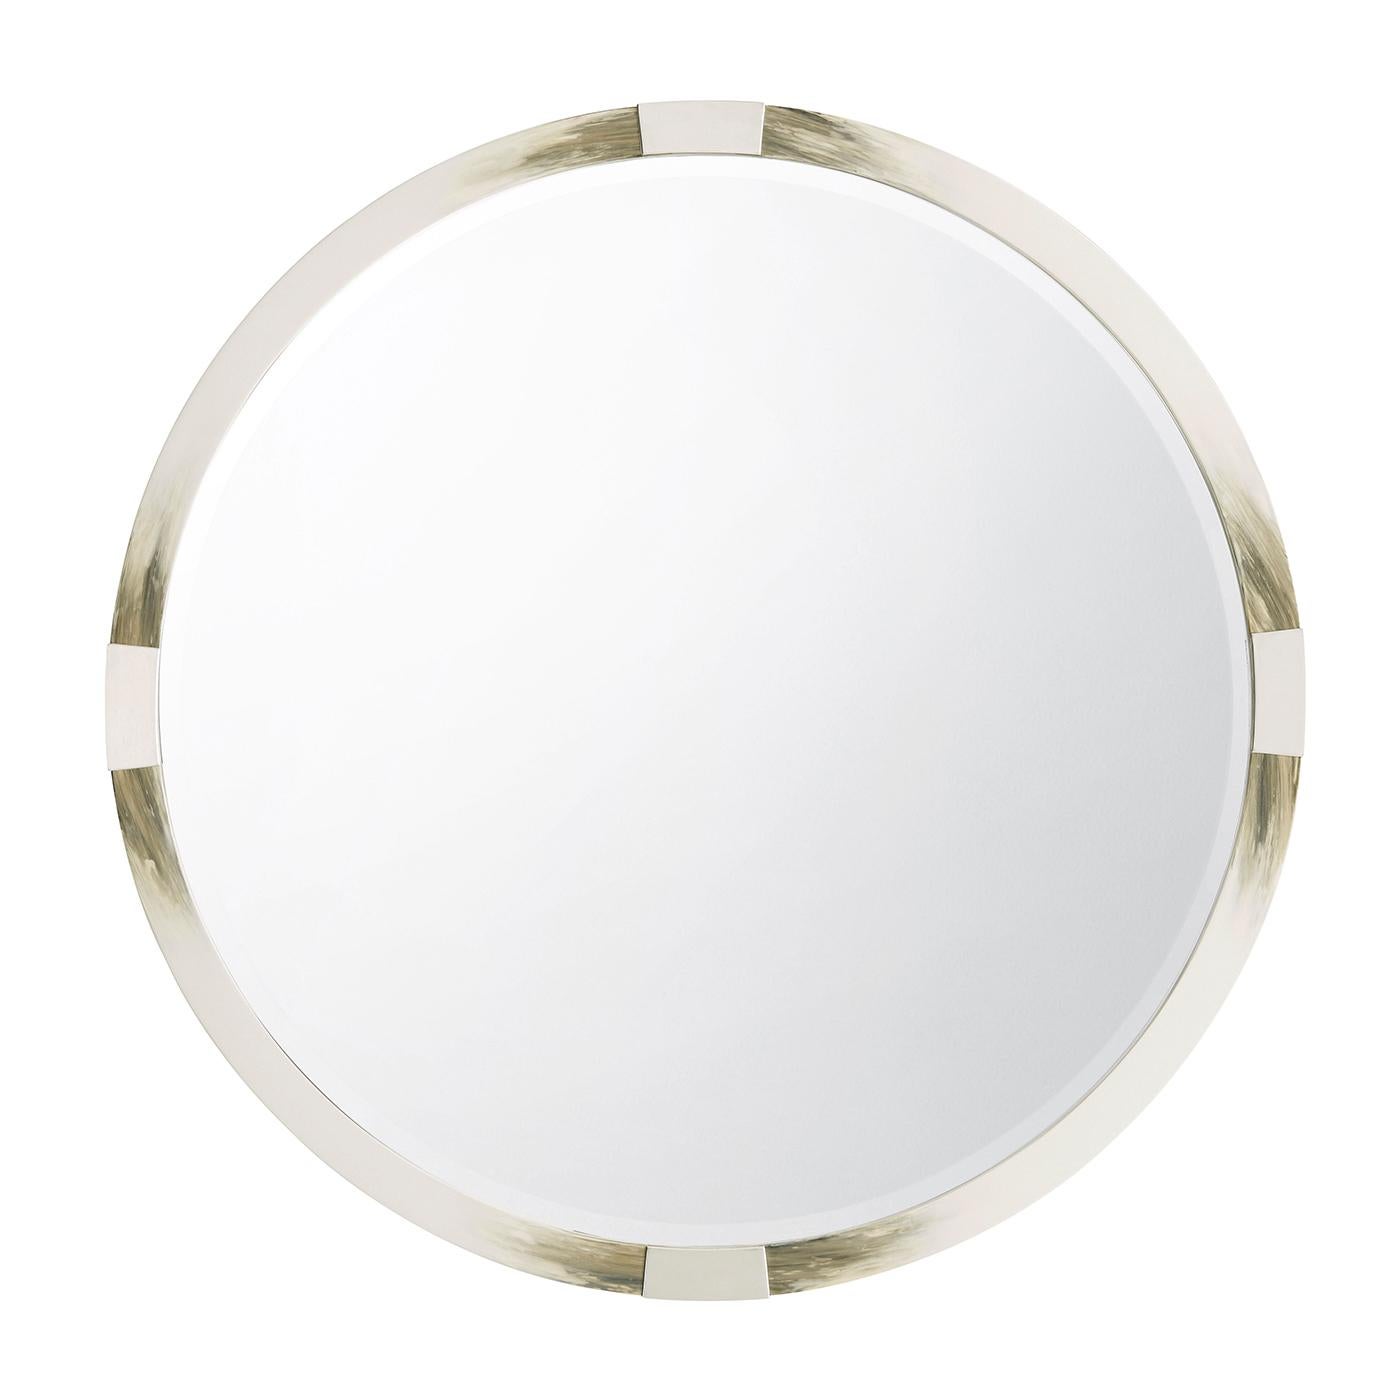 Large Modern hand-painted faux horn wood frame mirror, with a rectangular beveled mirror plate and stainless steel edged corners.
Dimensions: 41.75